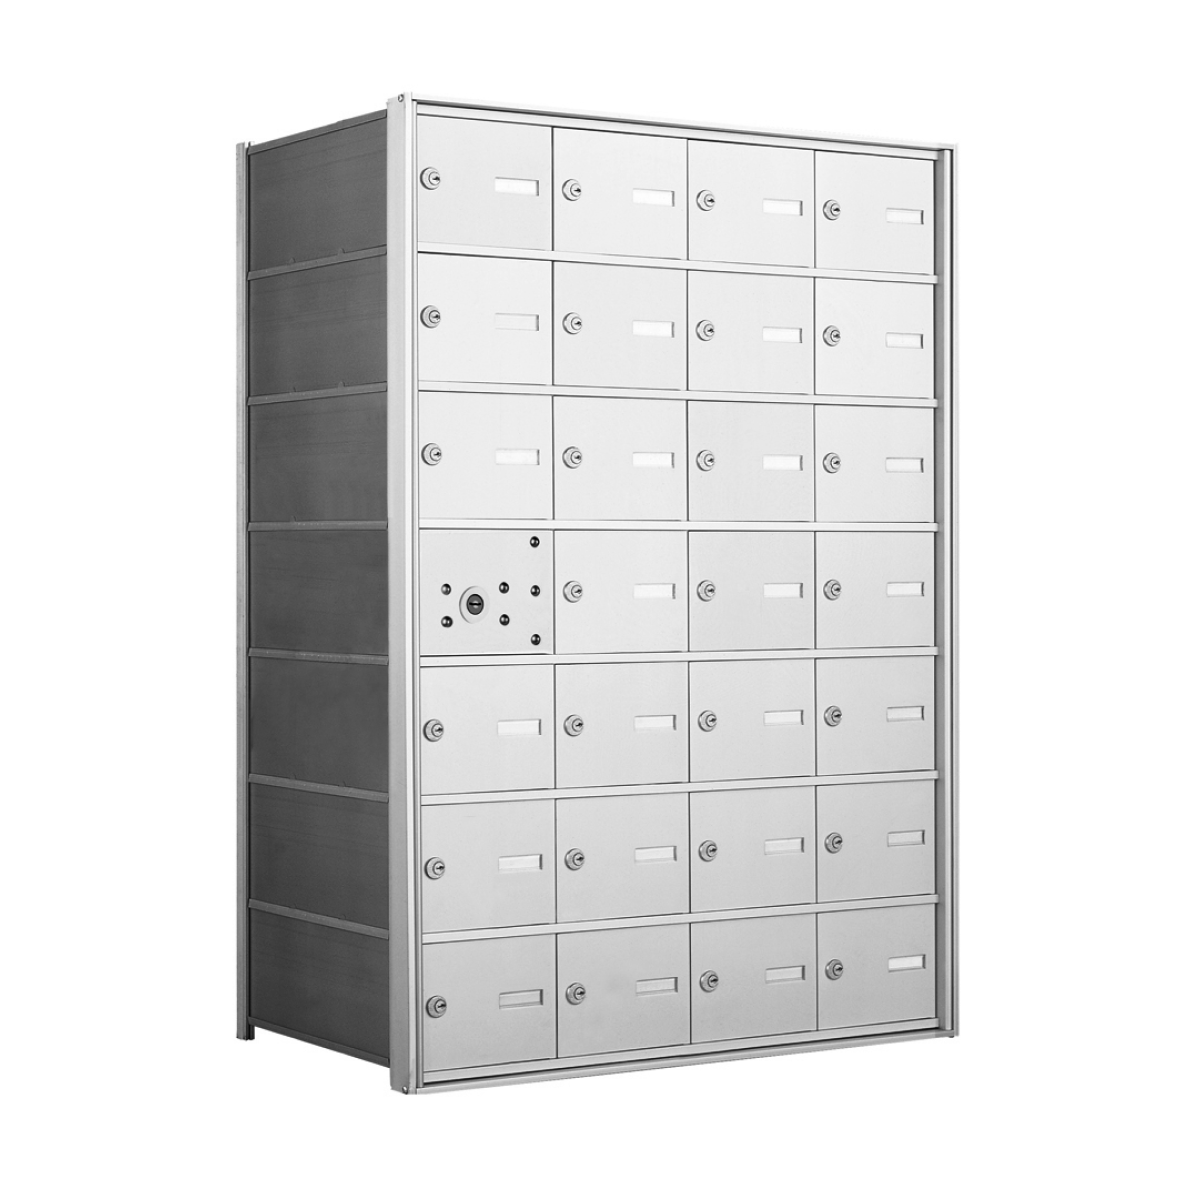 1400 Series Front Loading Horizontal Mailbox in Anodized Aluminum Finish with Master Access Door and 27 Compartments Product Image